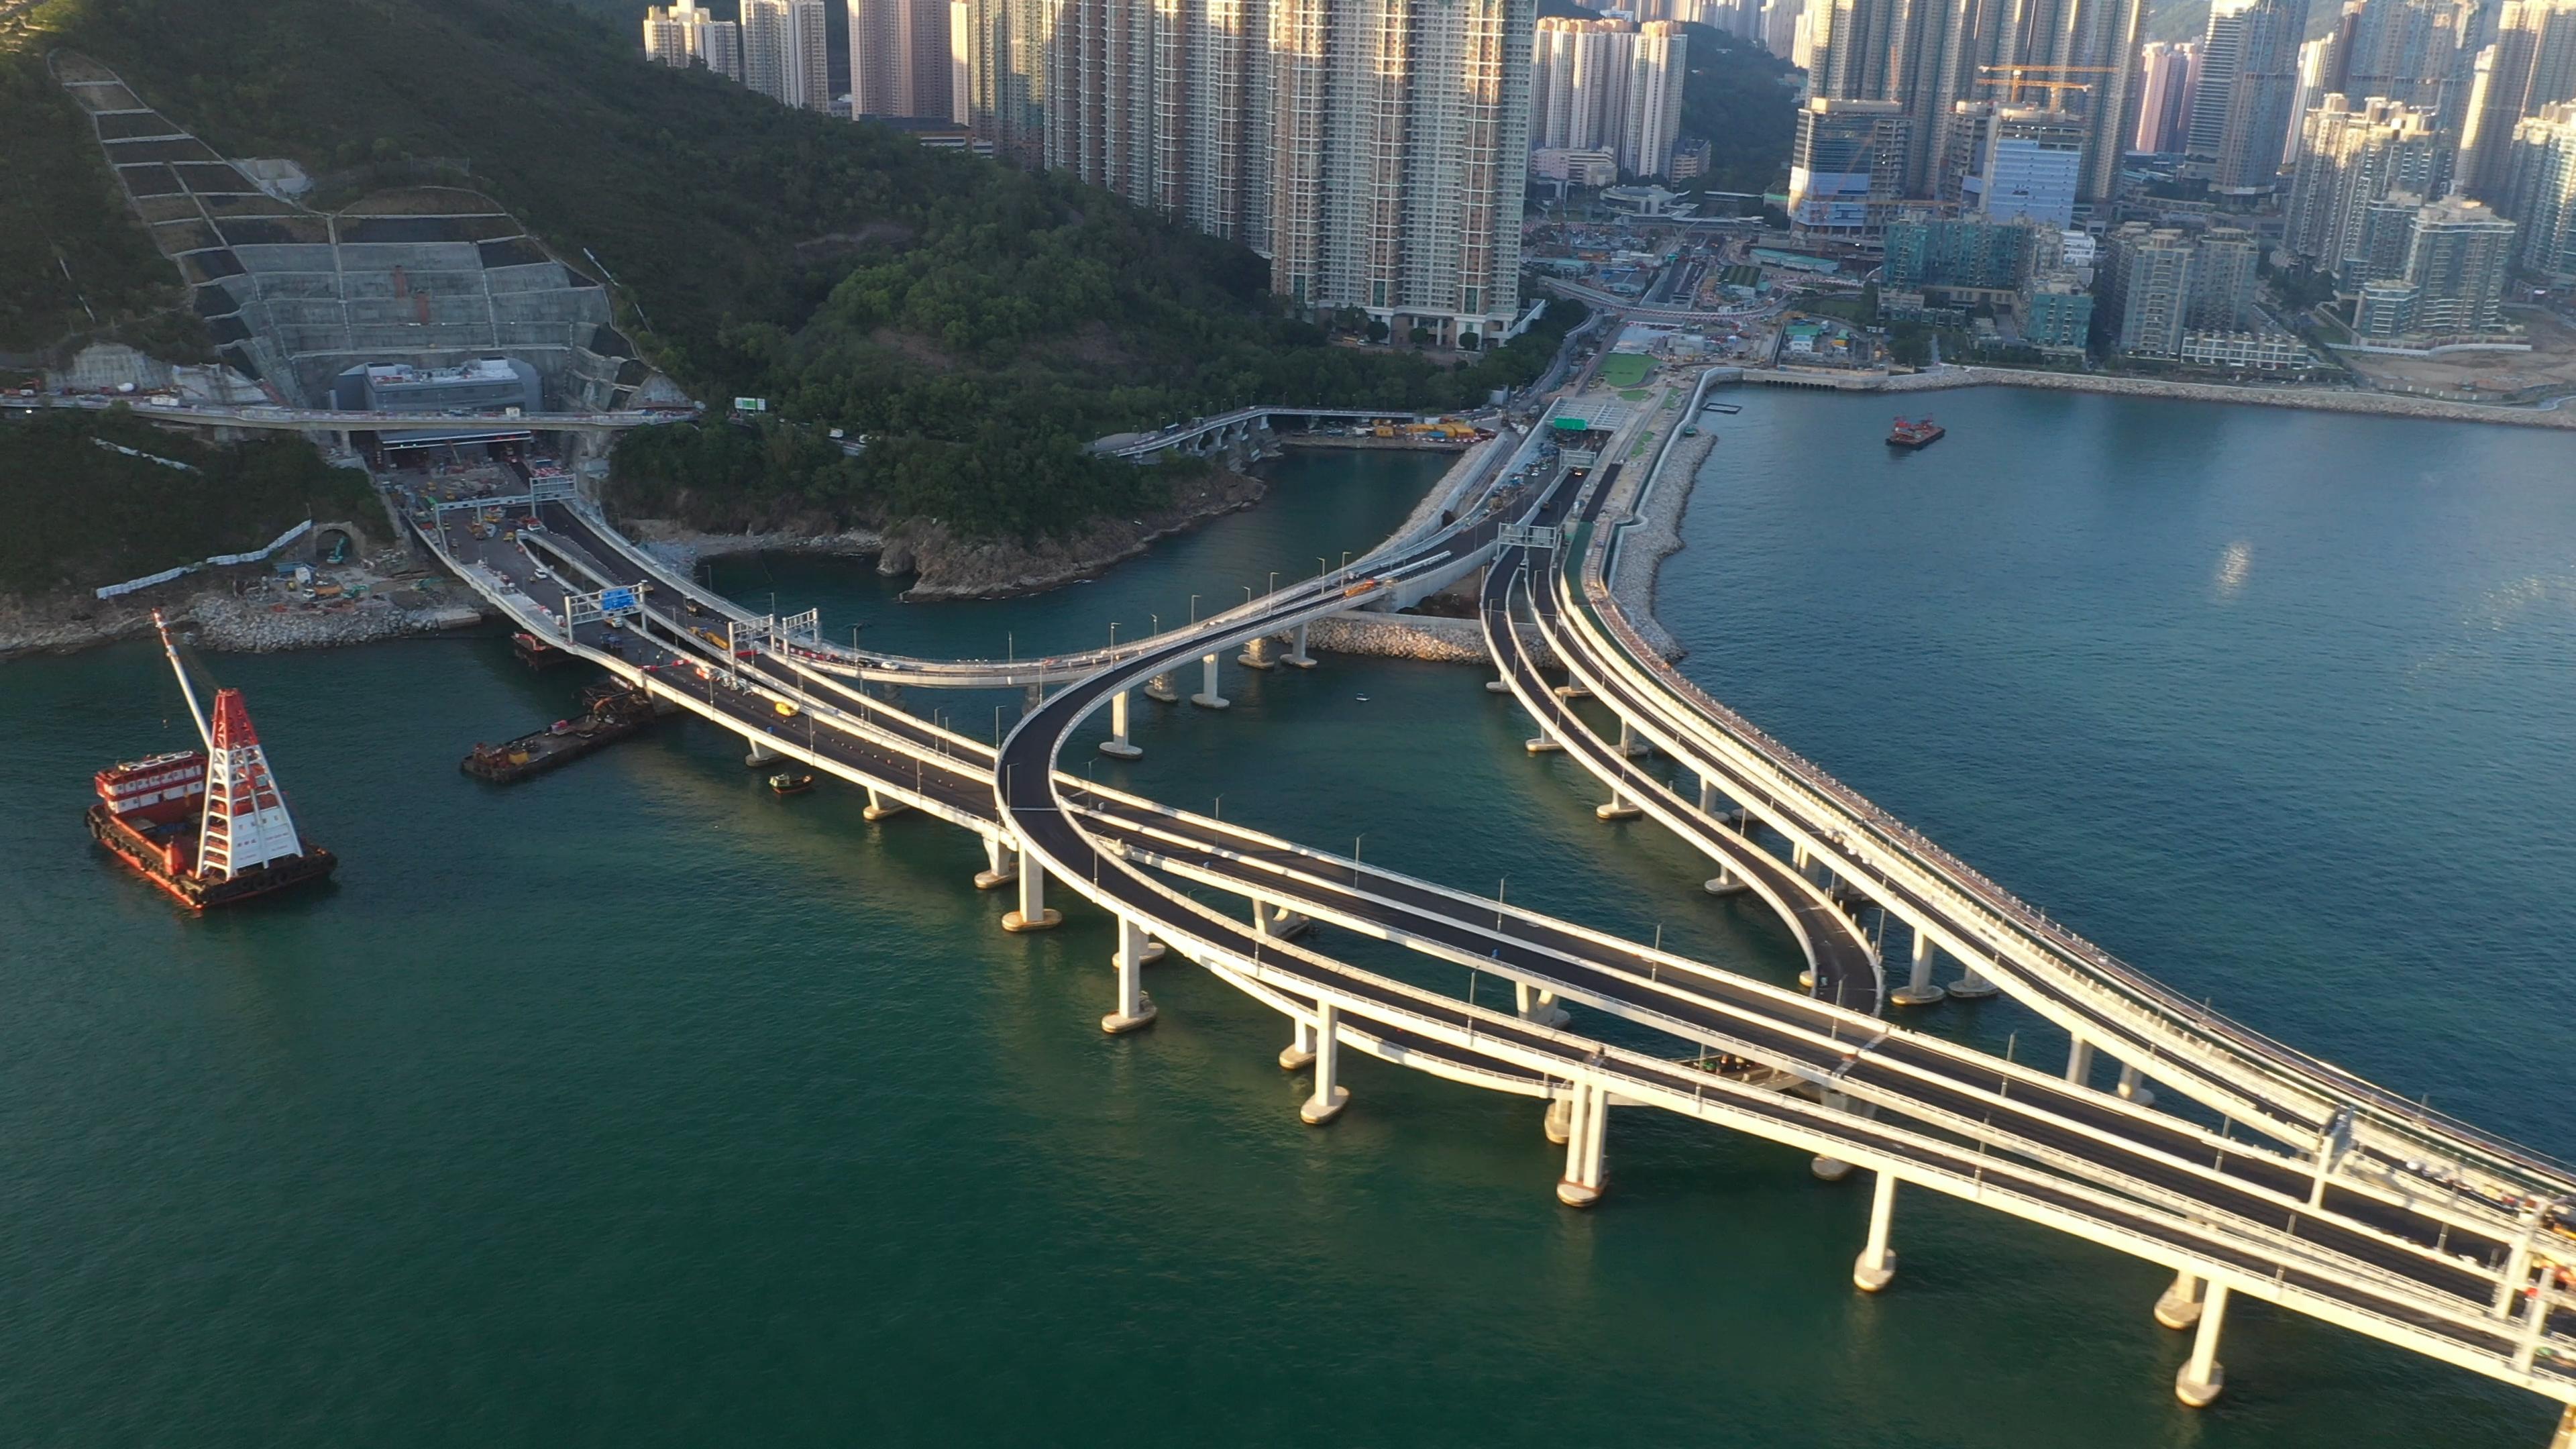 The Tseung Kwan O-Lam Tin Tunnel (TKO-LTT) and the Cross Bay Link, Tseung Kwan O (CBL) will be commissioned on December 11 (Sunday). The TKO-LTT connects the CBL and Po Shun Road in the east, and the Eastern Harbour Crossing, Cha Kwo Ling Road in Kwun Tong and the Trunk Road T2 under construction in the west. Photo shows eastern tunnel portal area of the TKO-LTT and Tseung Kwan O Interchange.